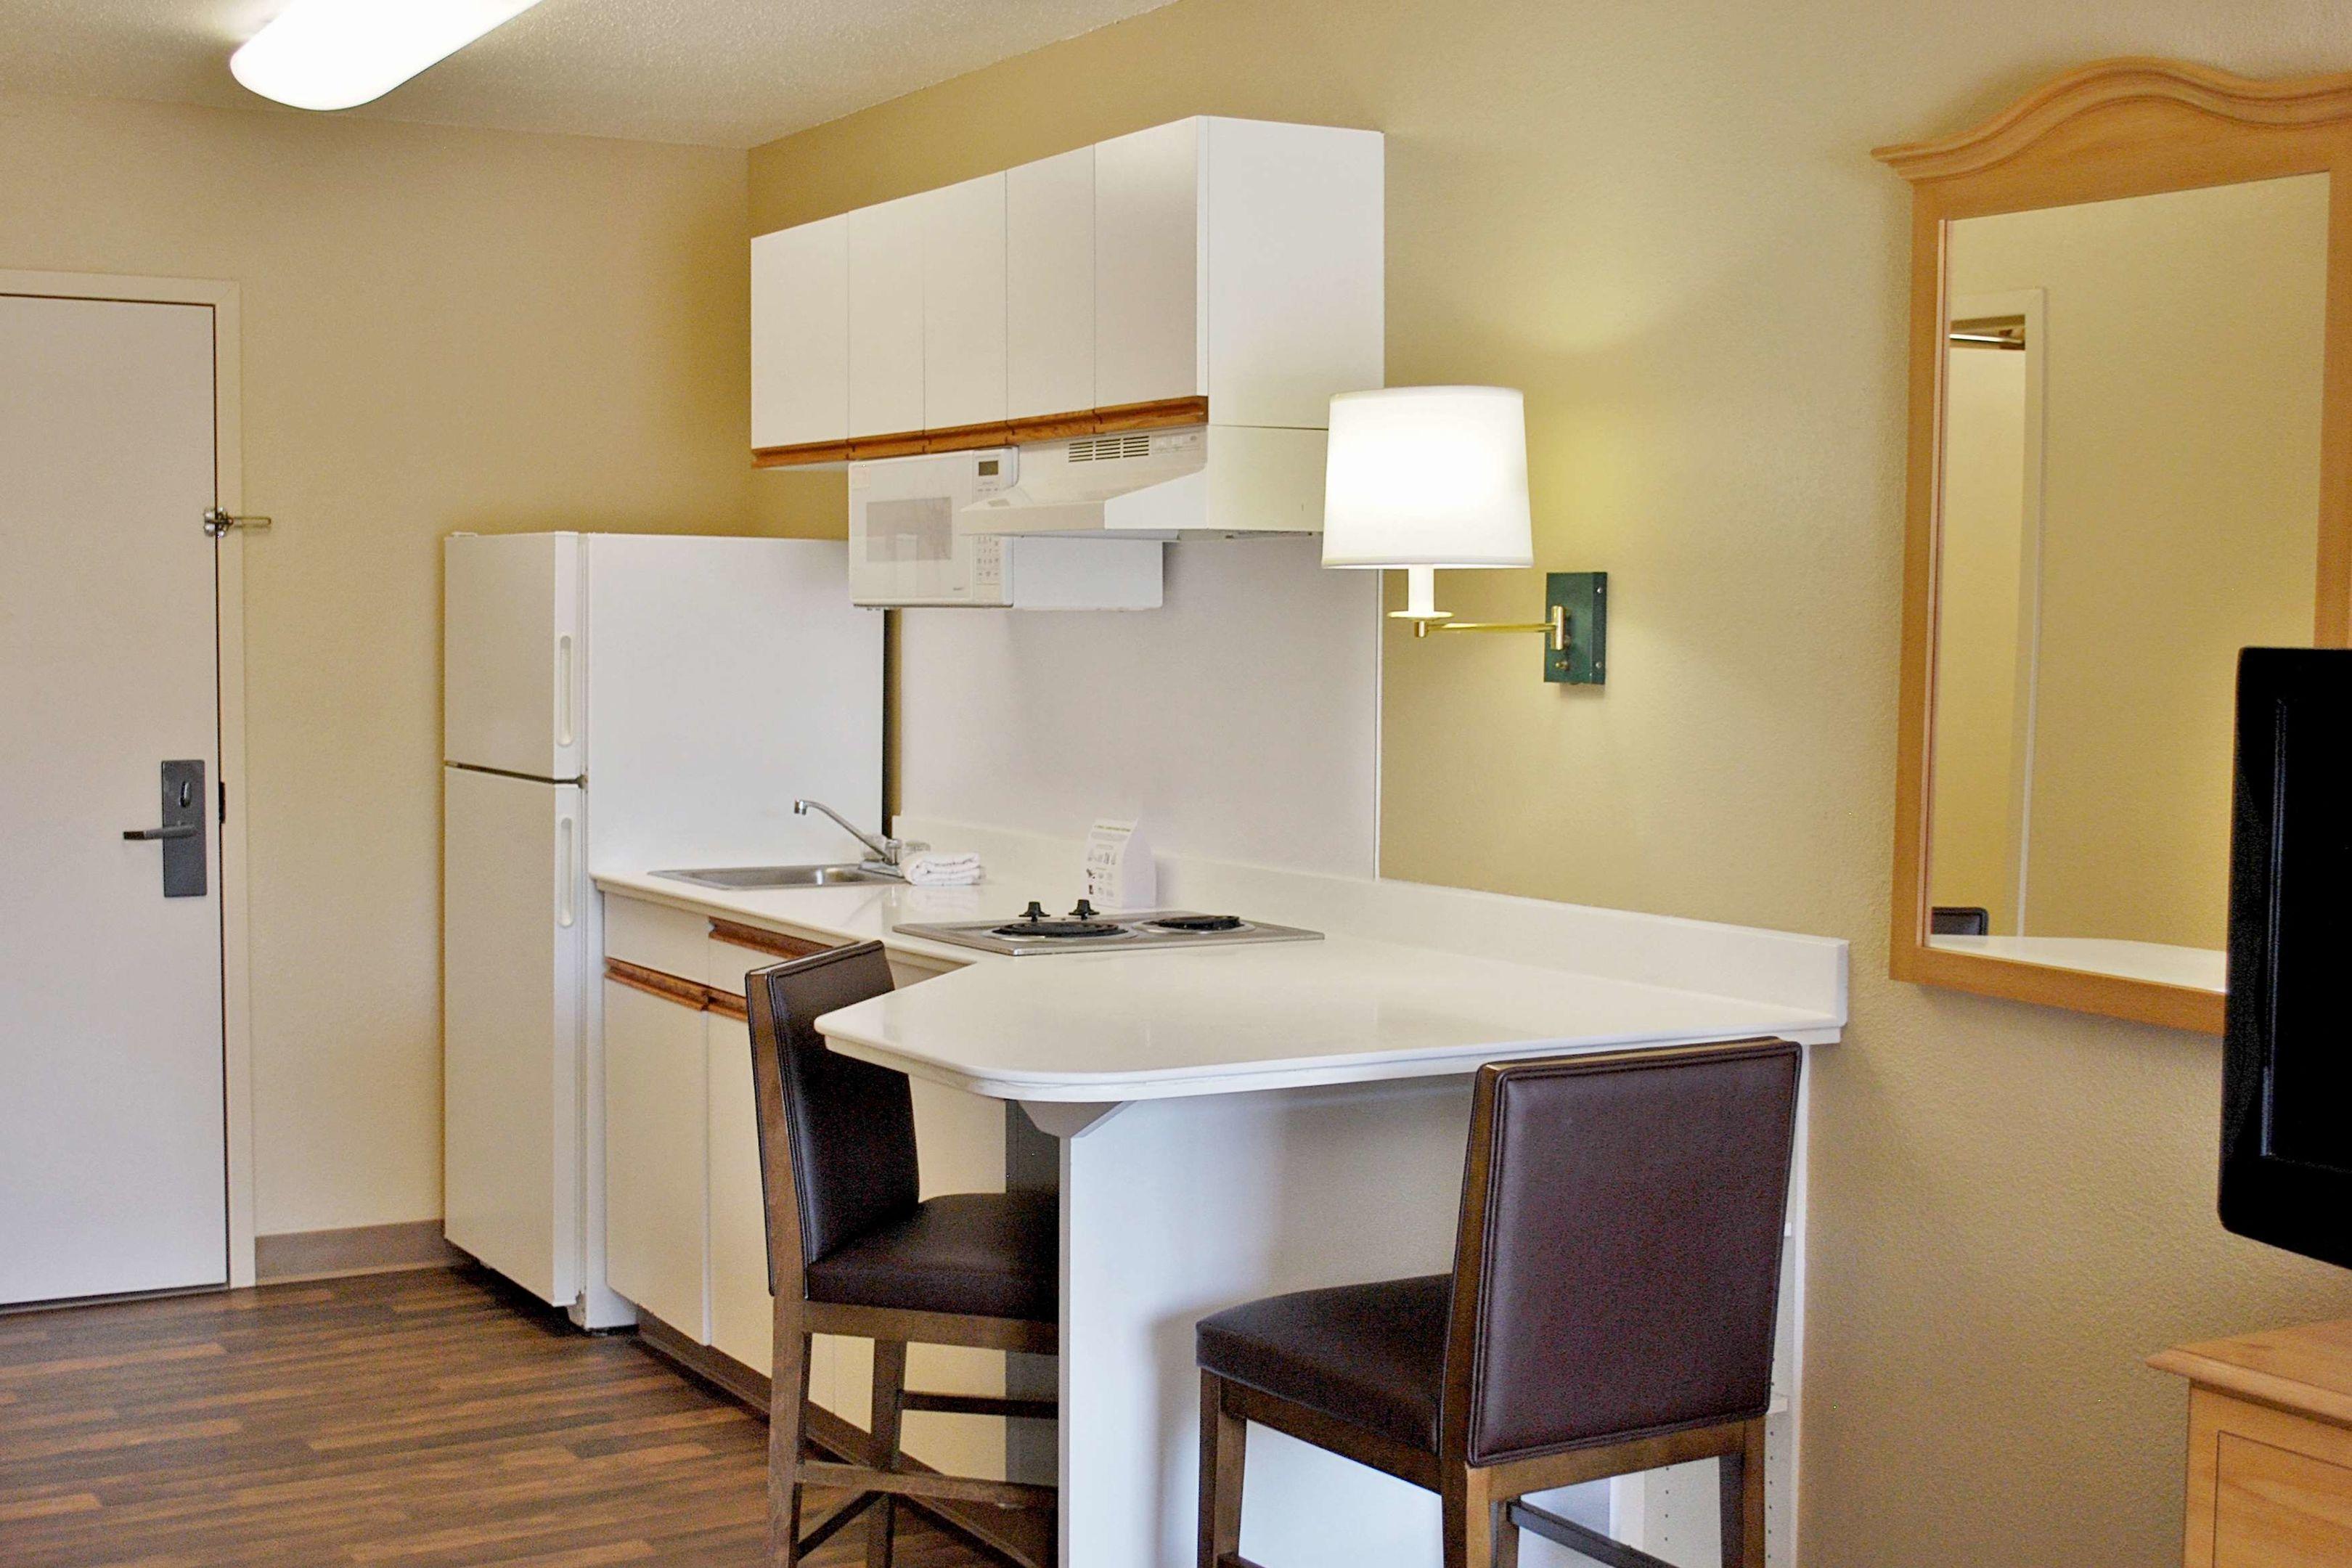 Extended Stay America - Memphis - Germantown